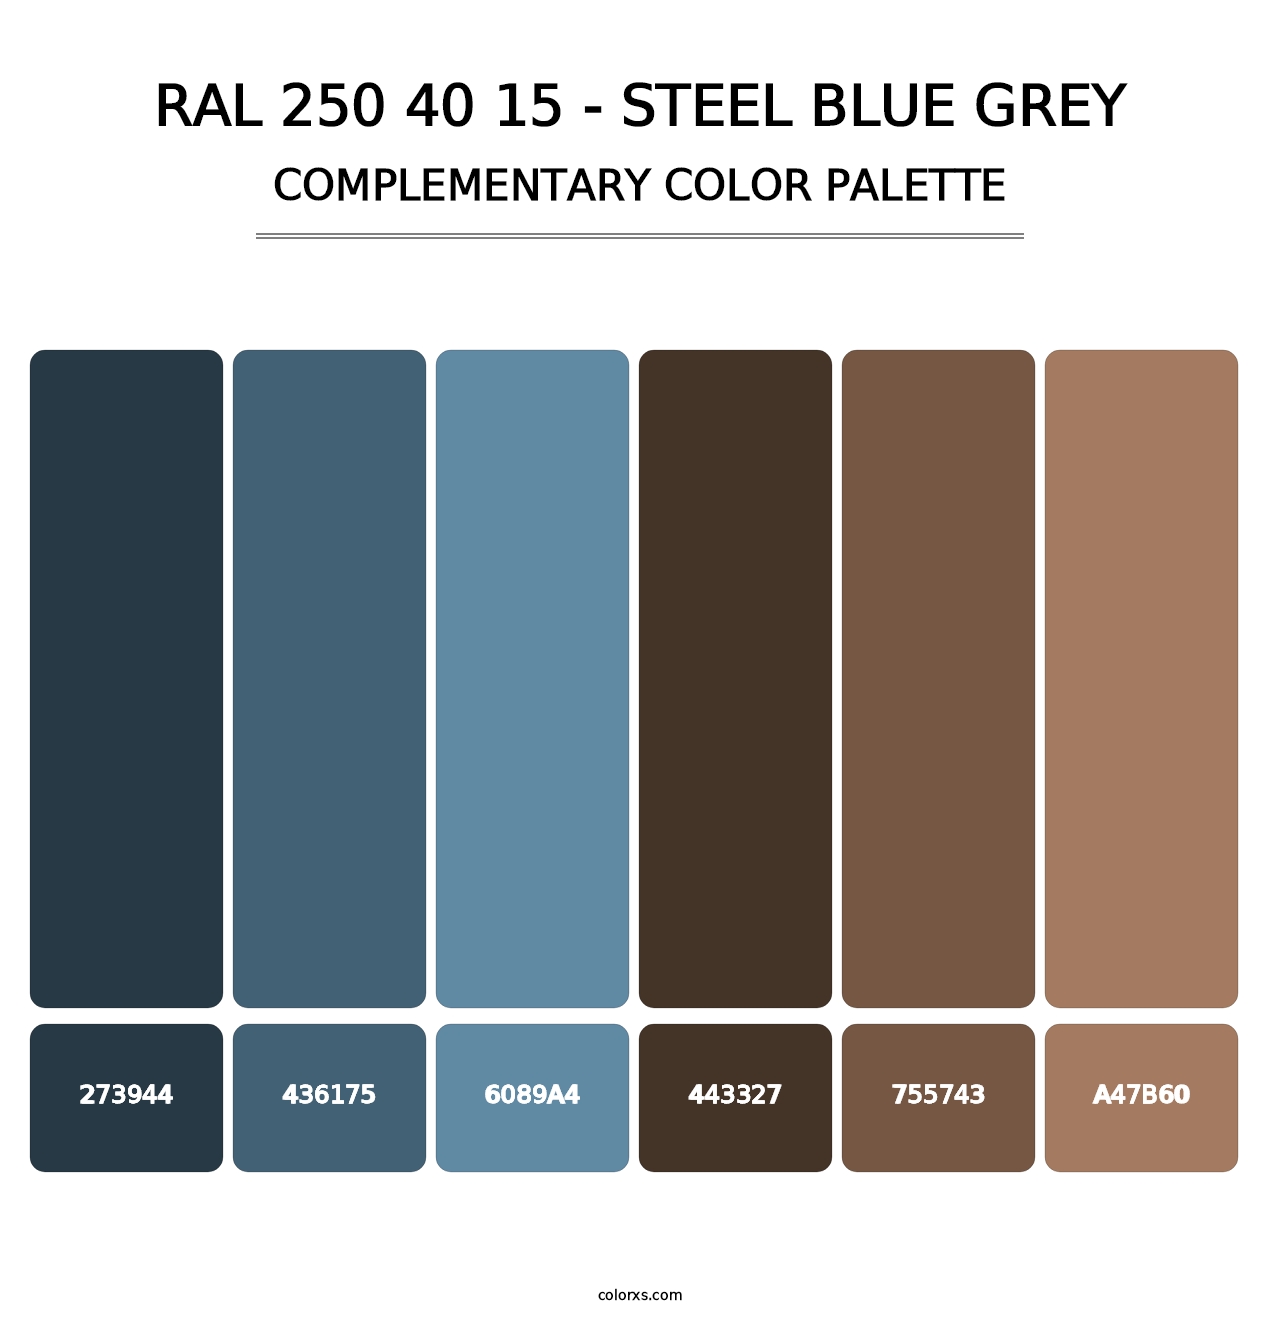 RAL 250 40 15 - Steel Blue Grey - Complementary Color Palette